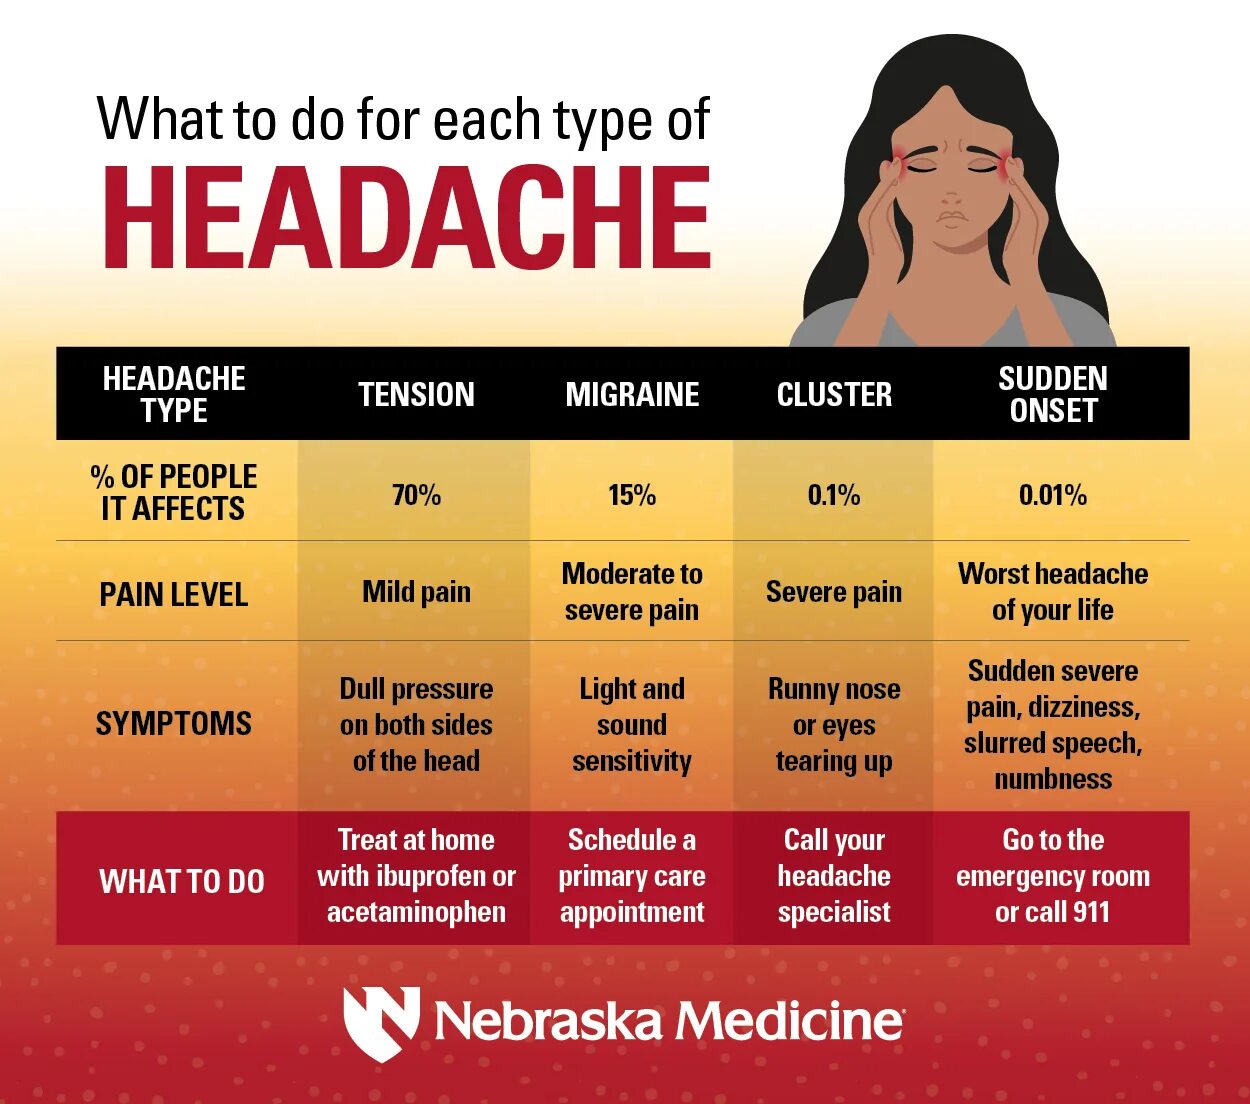 Головная боль переводчика. What to do for headache. Types of headache. What to do to Cure headache instantly.